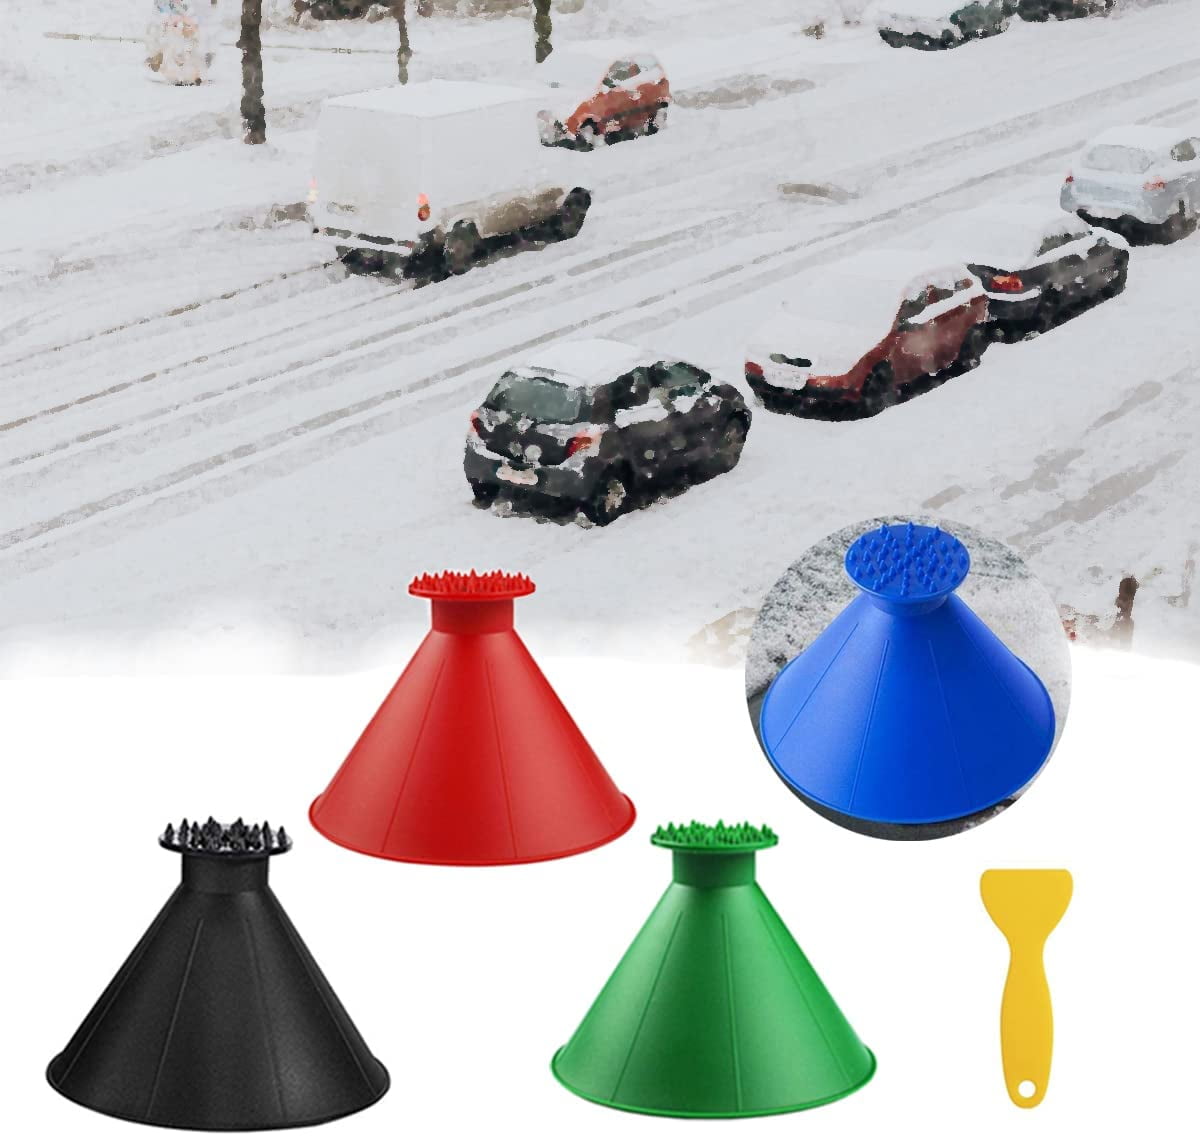 SEAAES 39 Extendable Ice Scraper and Snow Brush with Foam Grip for Car  Truck SUV Vehicle Window Green 